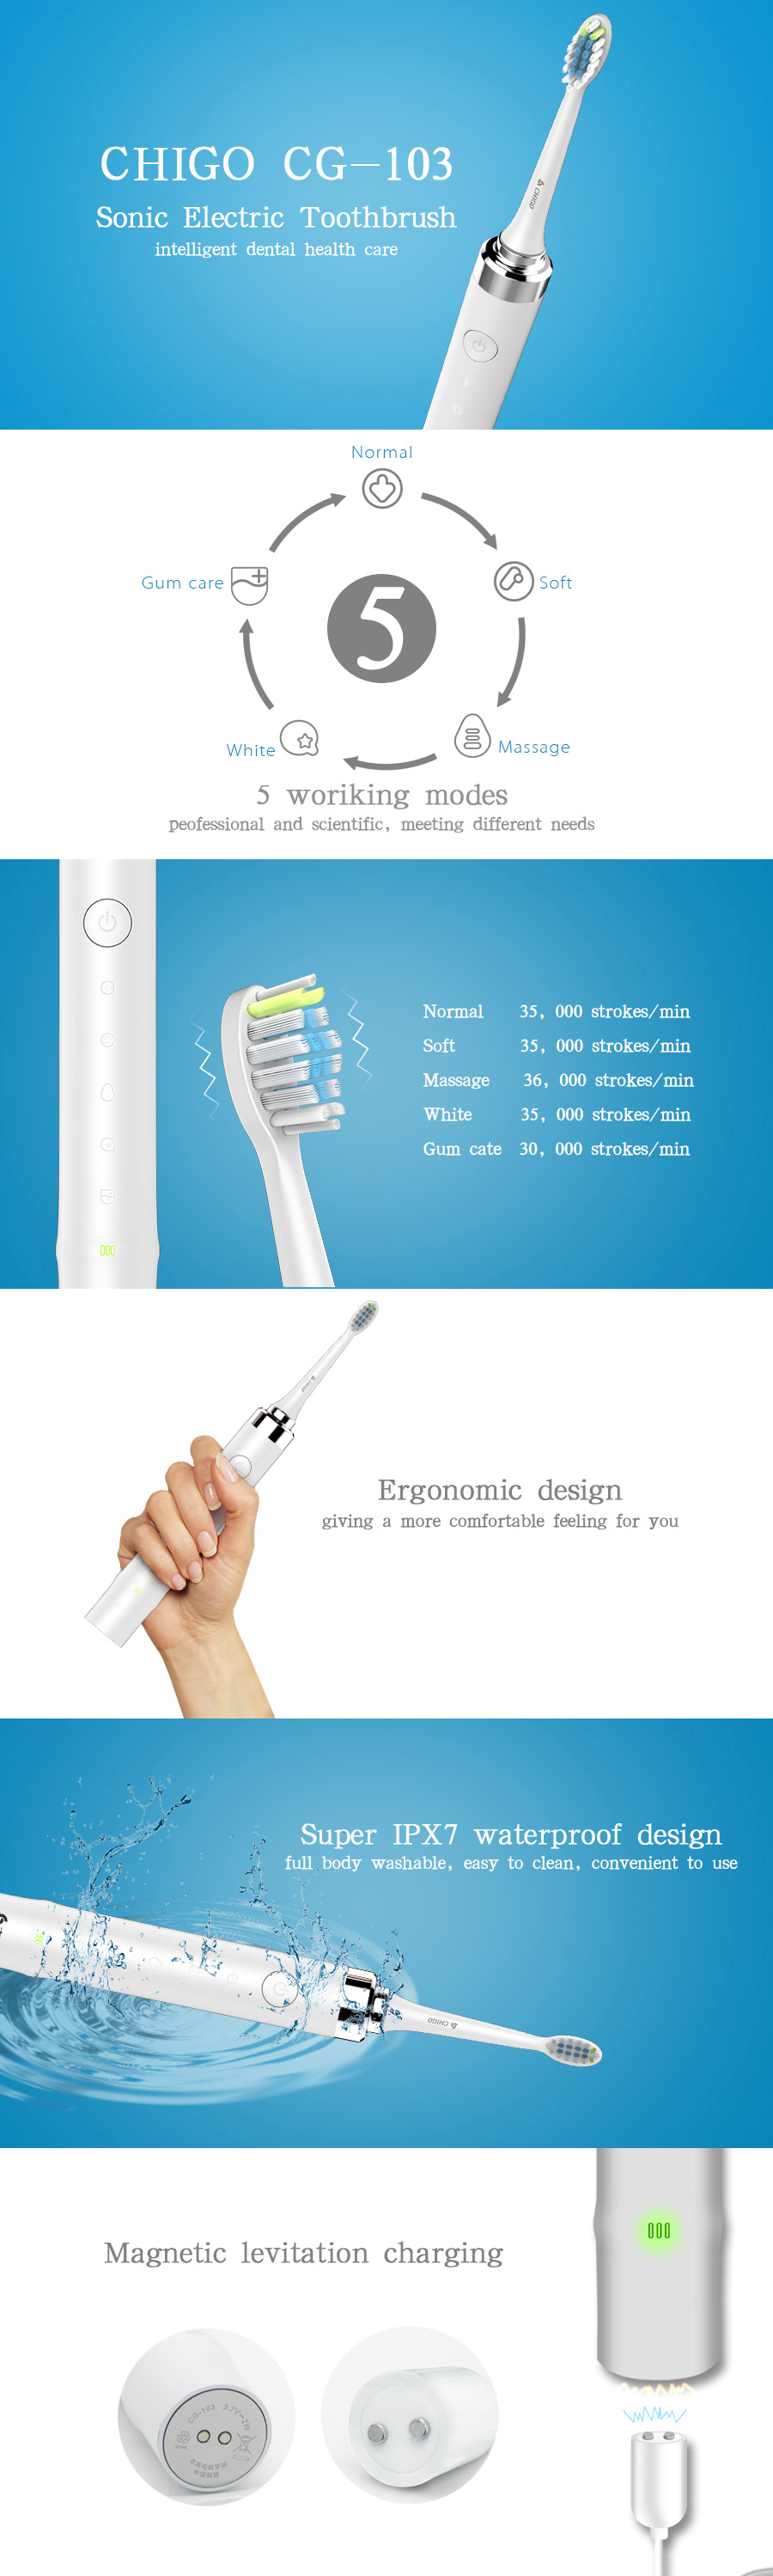 BITOU-BEAUTY-3-in-1-Multi-purpose-Sonic-Electric-Toothbrush-1295263-1